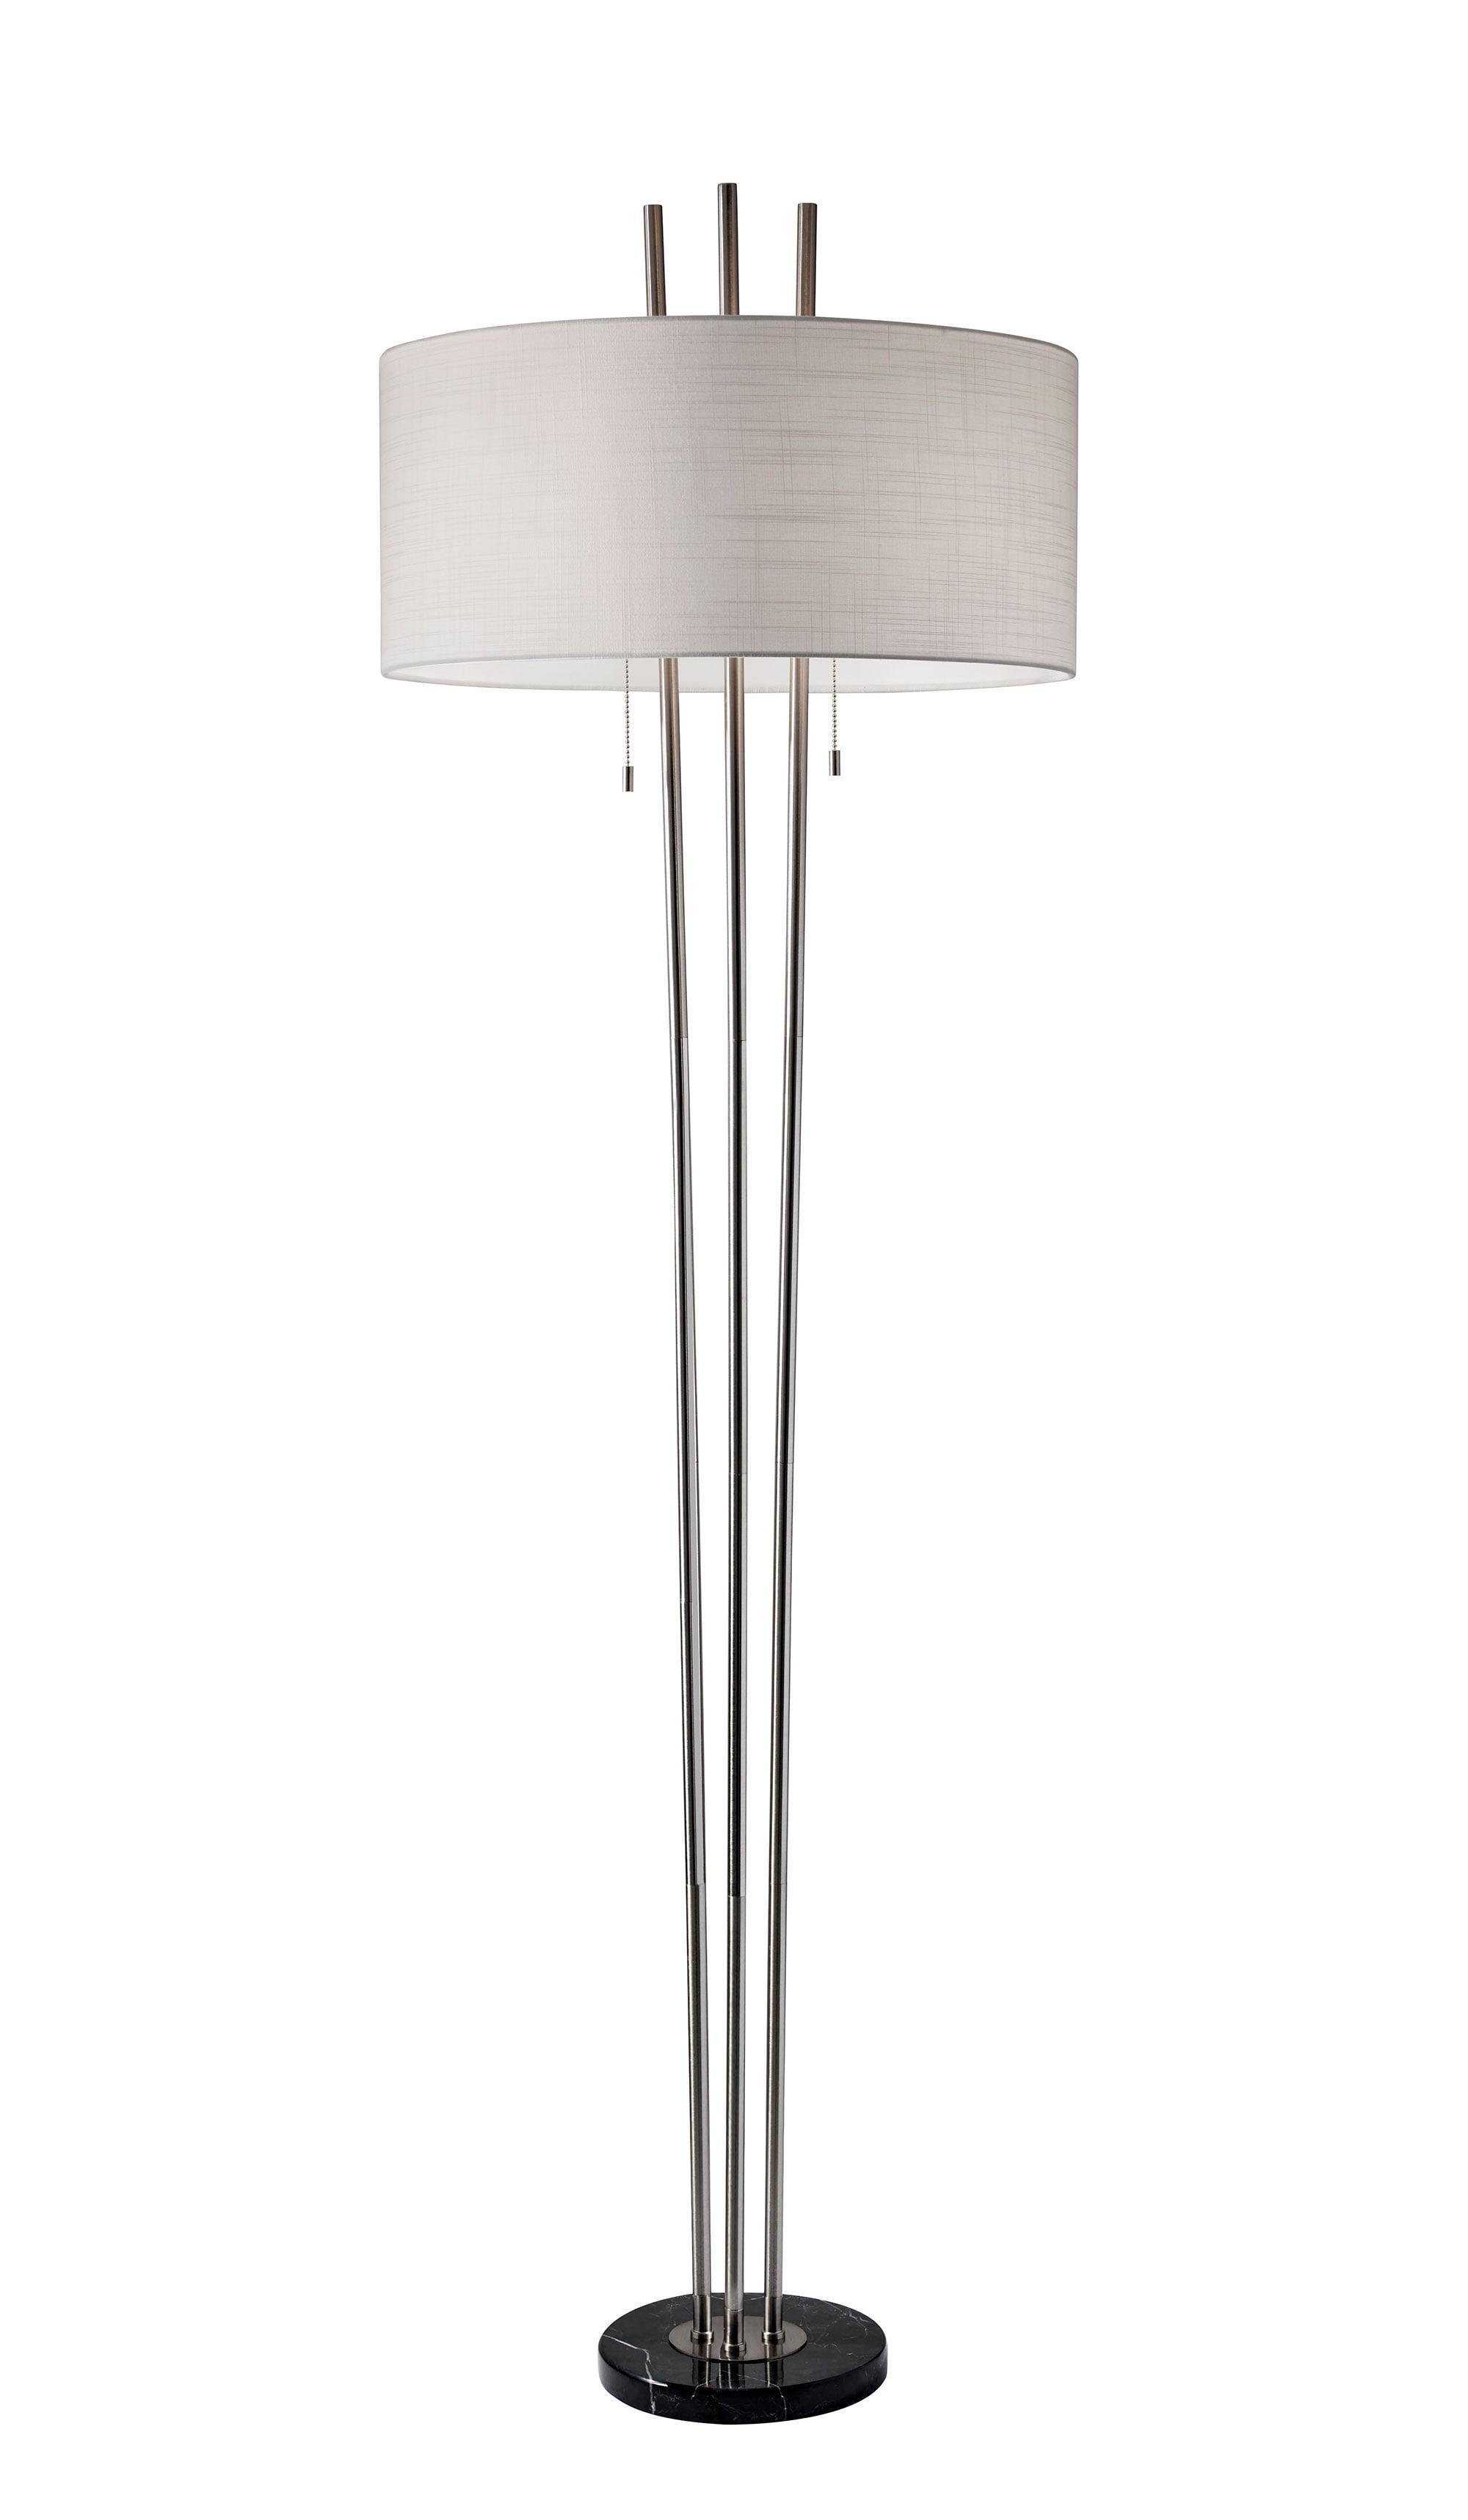 Elegant White Textured Linen Shade Floor Lamp with Marble Base